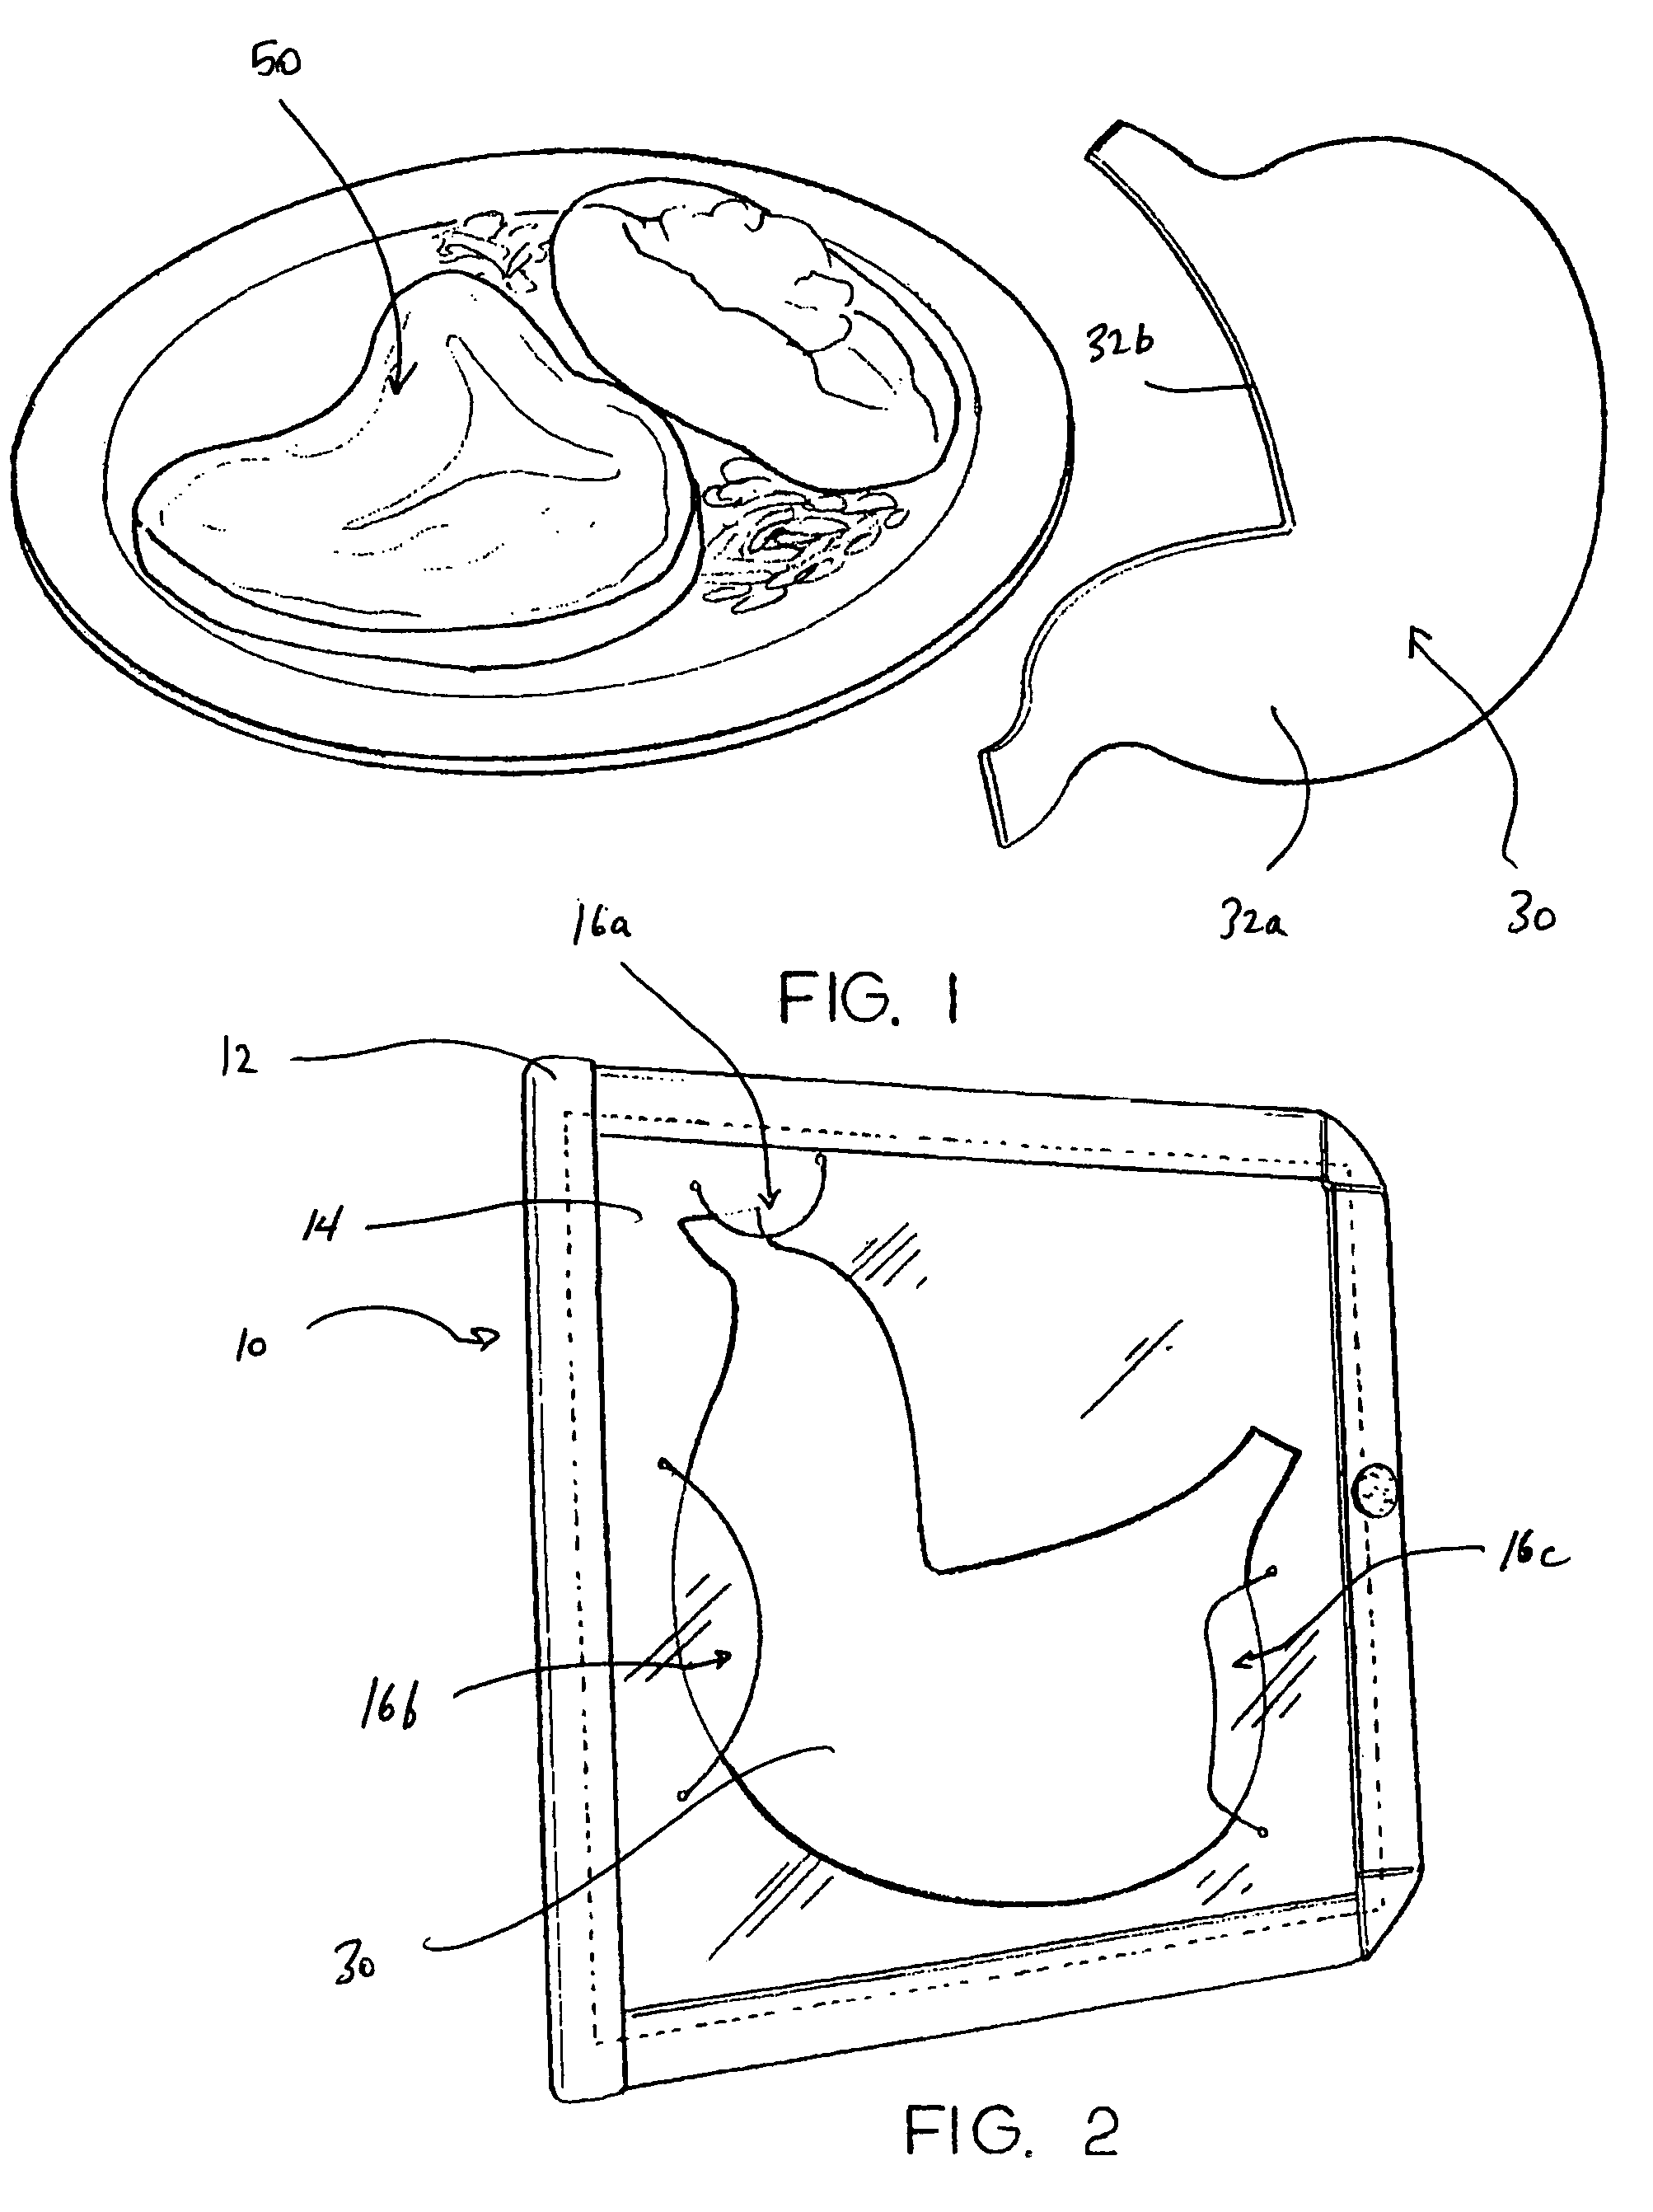 Stomach model visual dieting aid and method of use